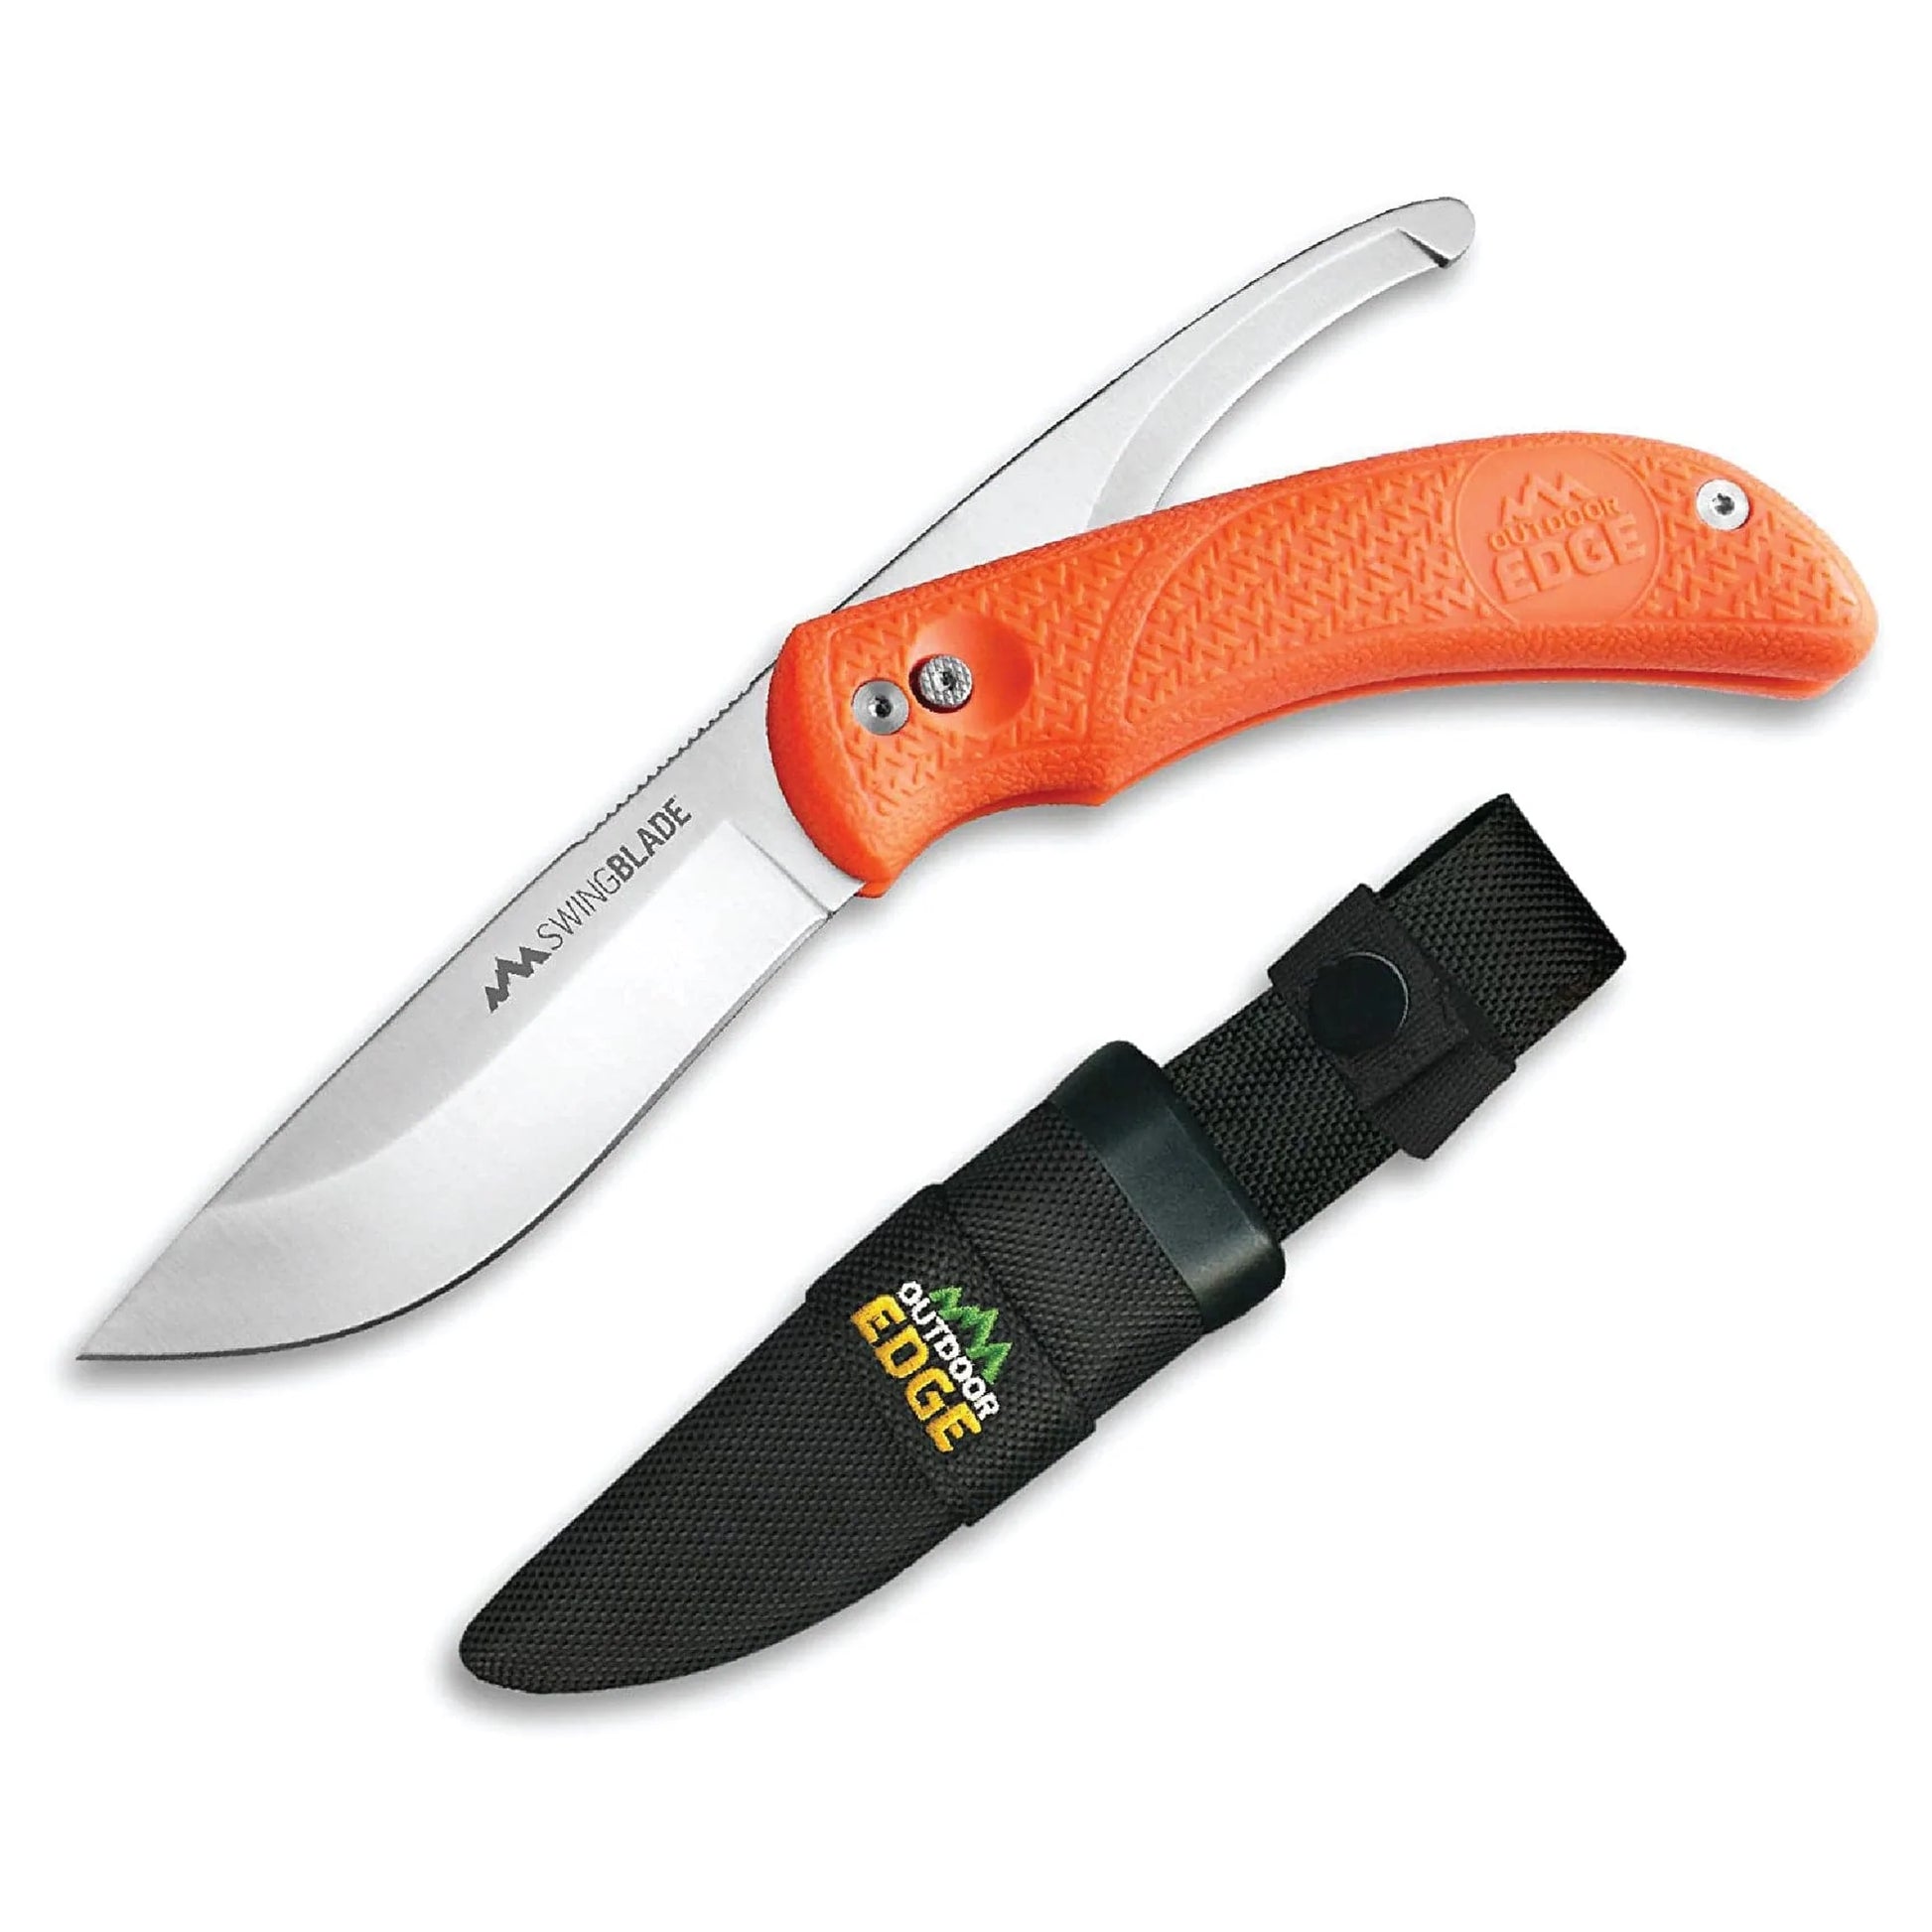 Couteau multi-fonctions SwingBlade - Outdoor Edge-T.A DEFENSE